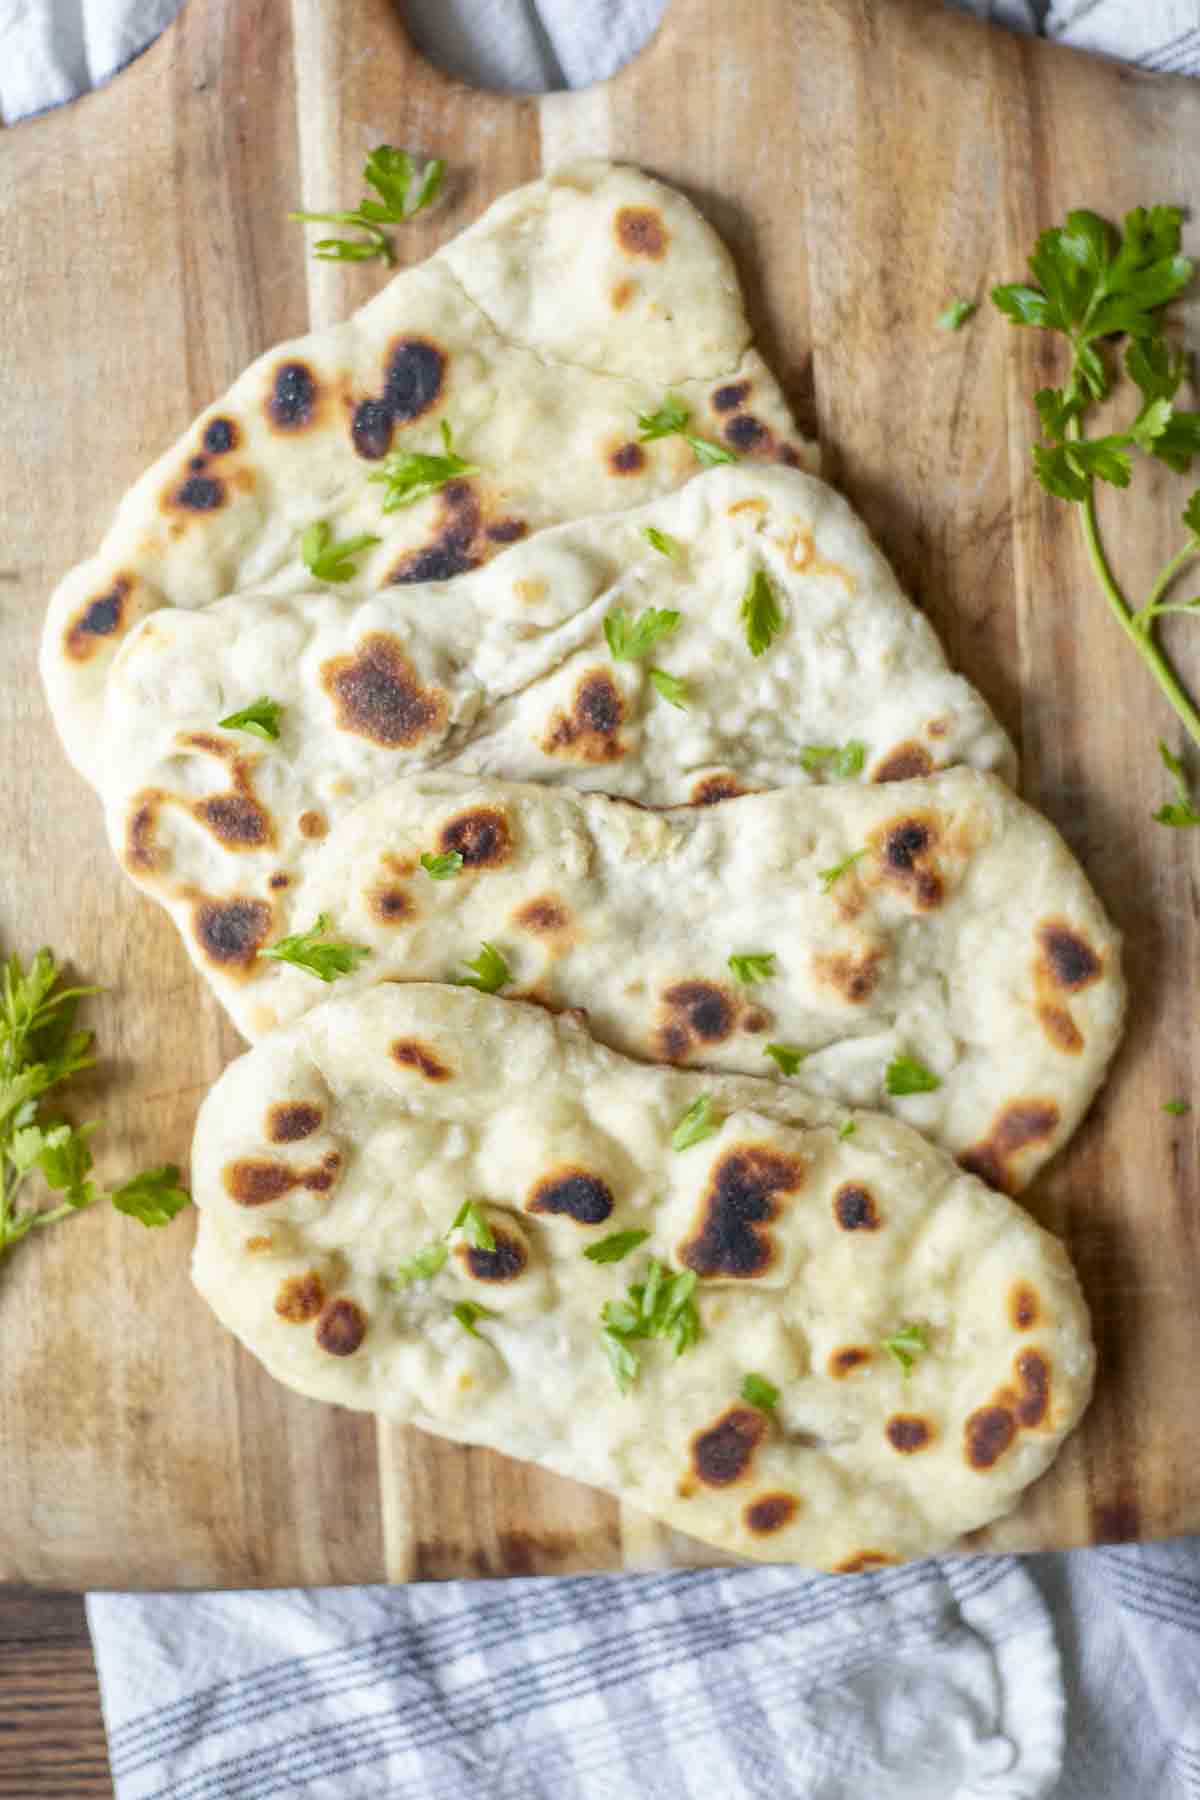 Easy Sourdough Flatbread Recipe With Active Starter Or Discard – No Yeast